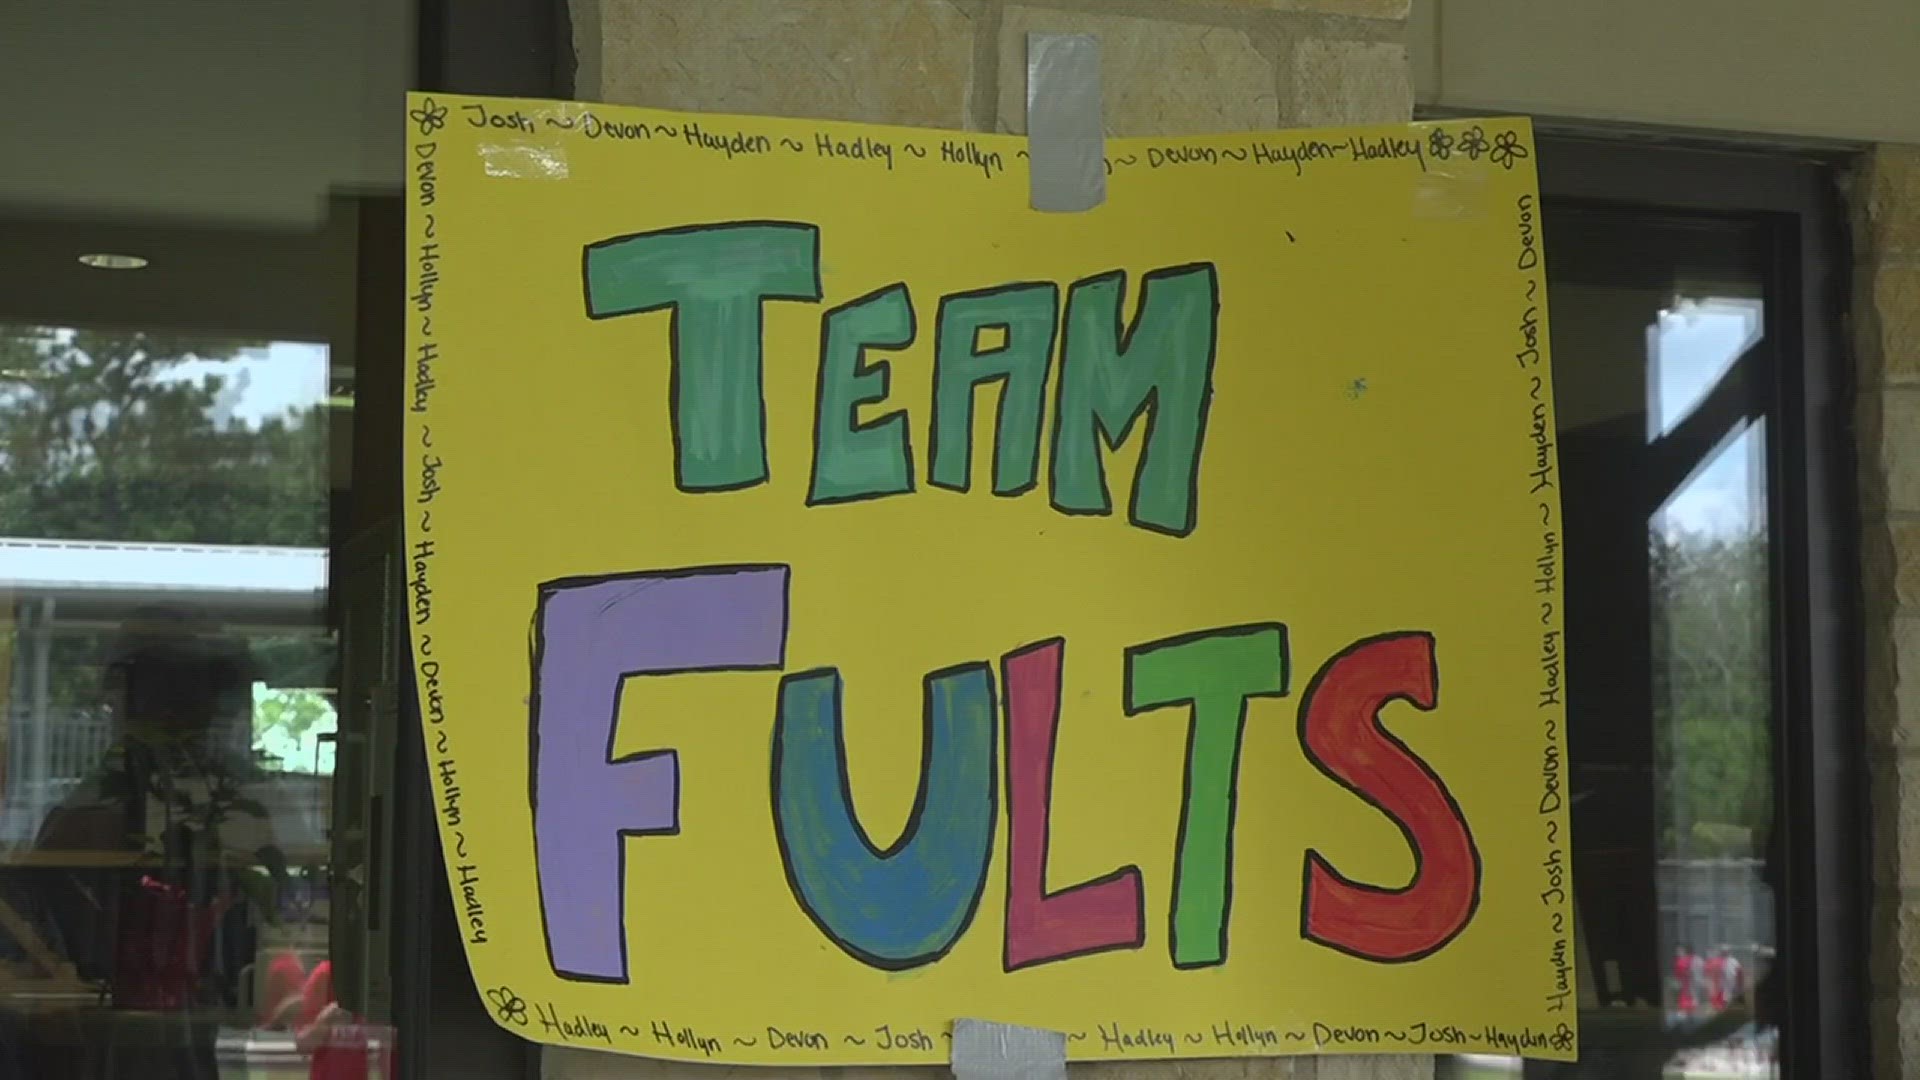 The Southeast Texas tennis community rallied together to support a family in need.